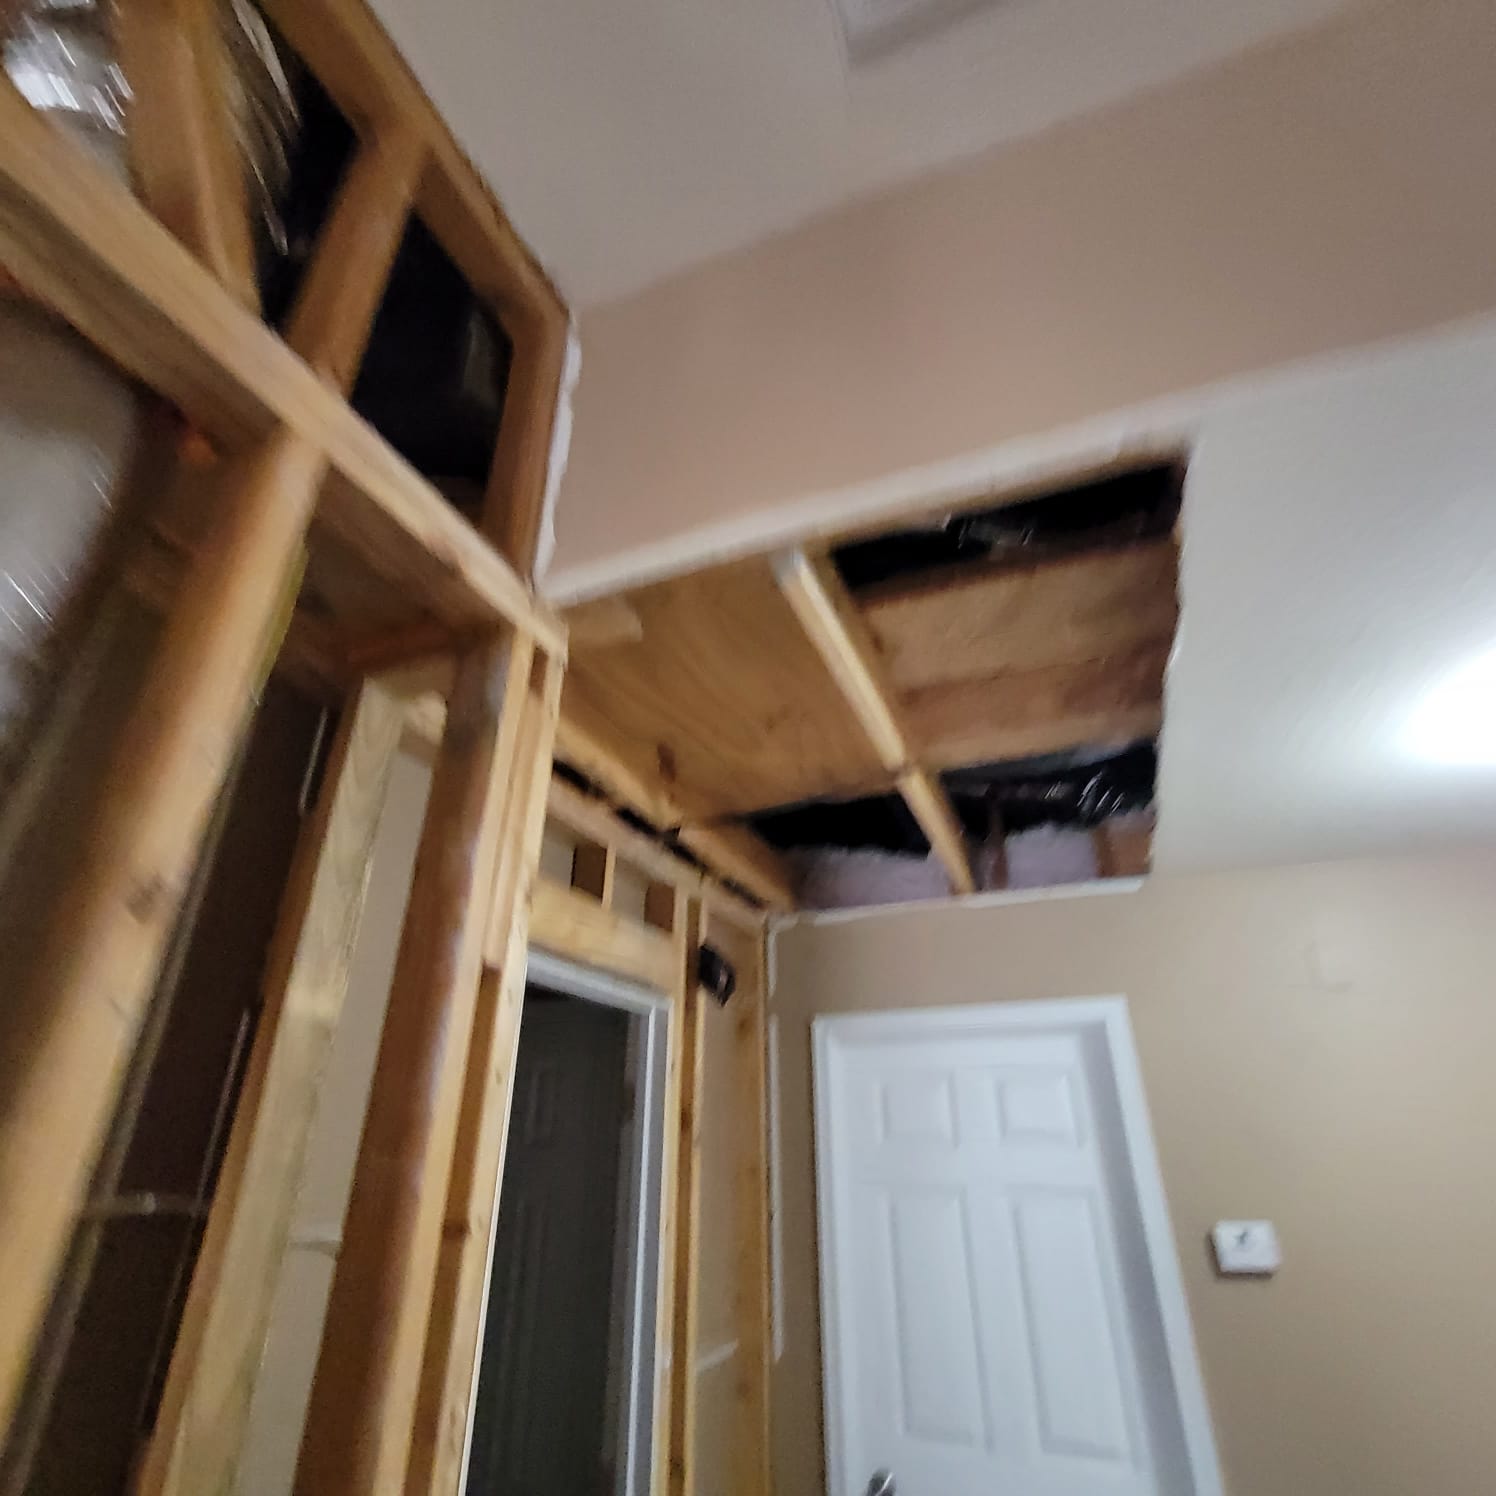 After an AC leak, we extracted all the water and moisture to dry out the property,‍ ran air movers and scrubbers, set containments as well as removed the damaged carpet and drywall